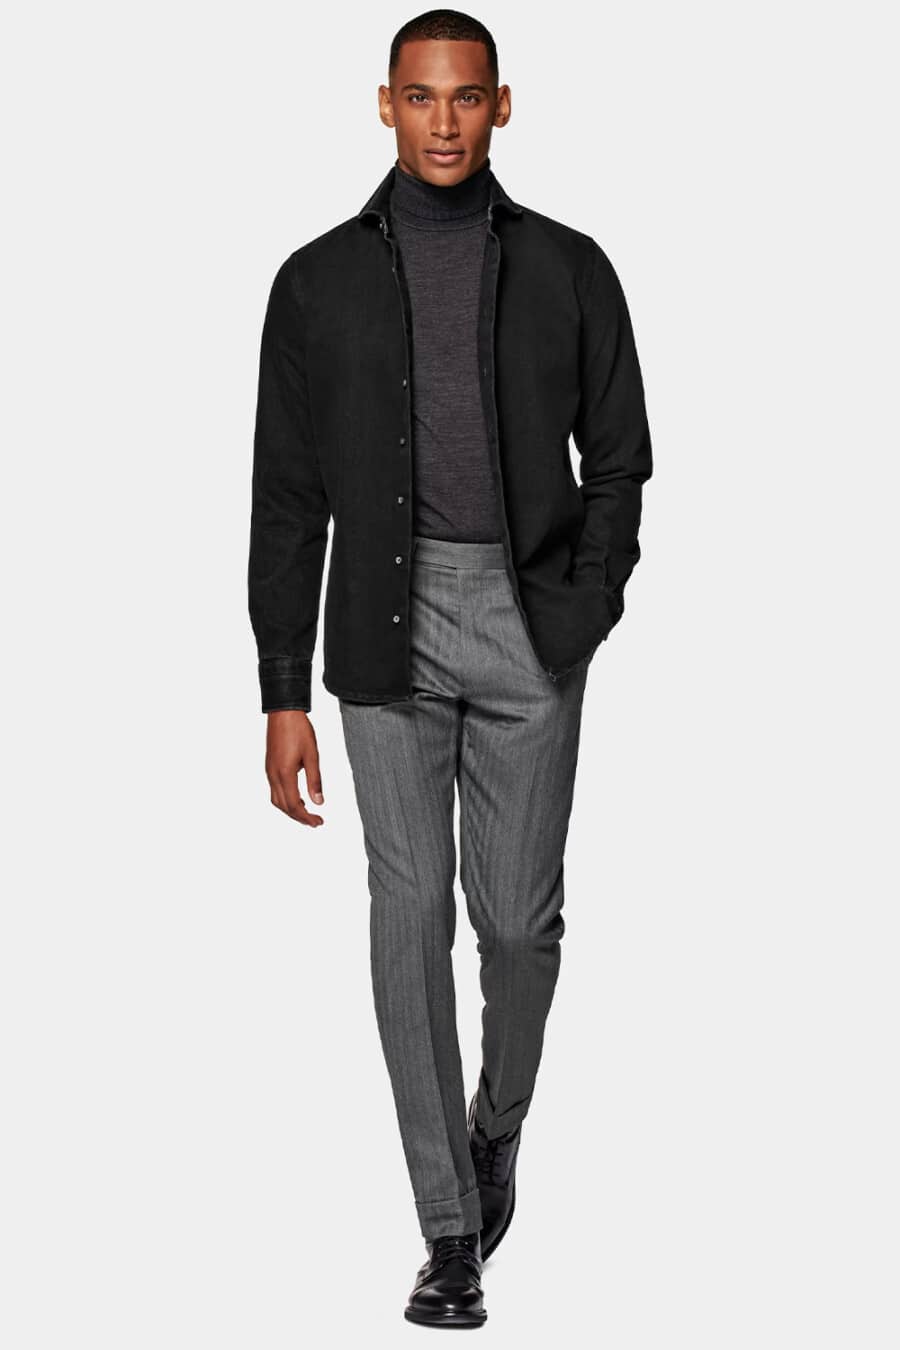 Men's grey flannel trousers, charcoal turtleneck, black overshirt and black leather Derby shoes business casual outfit